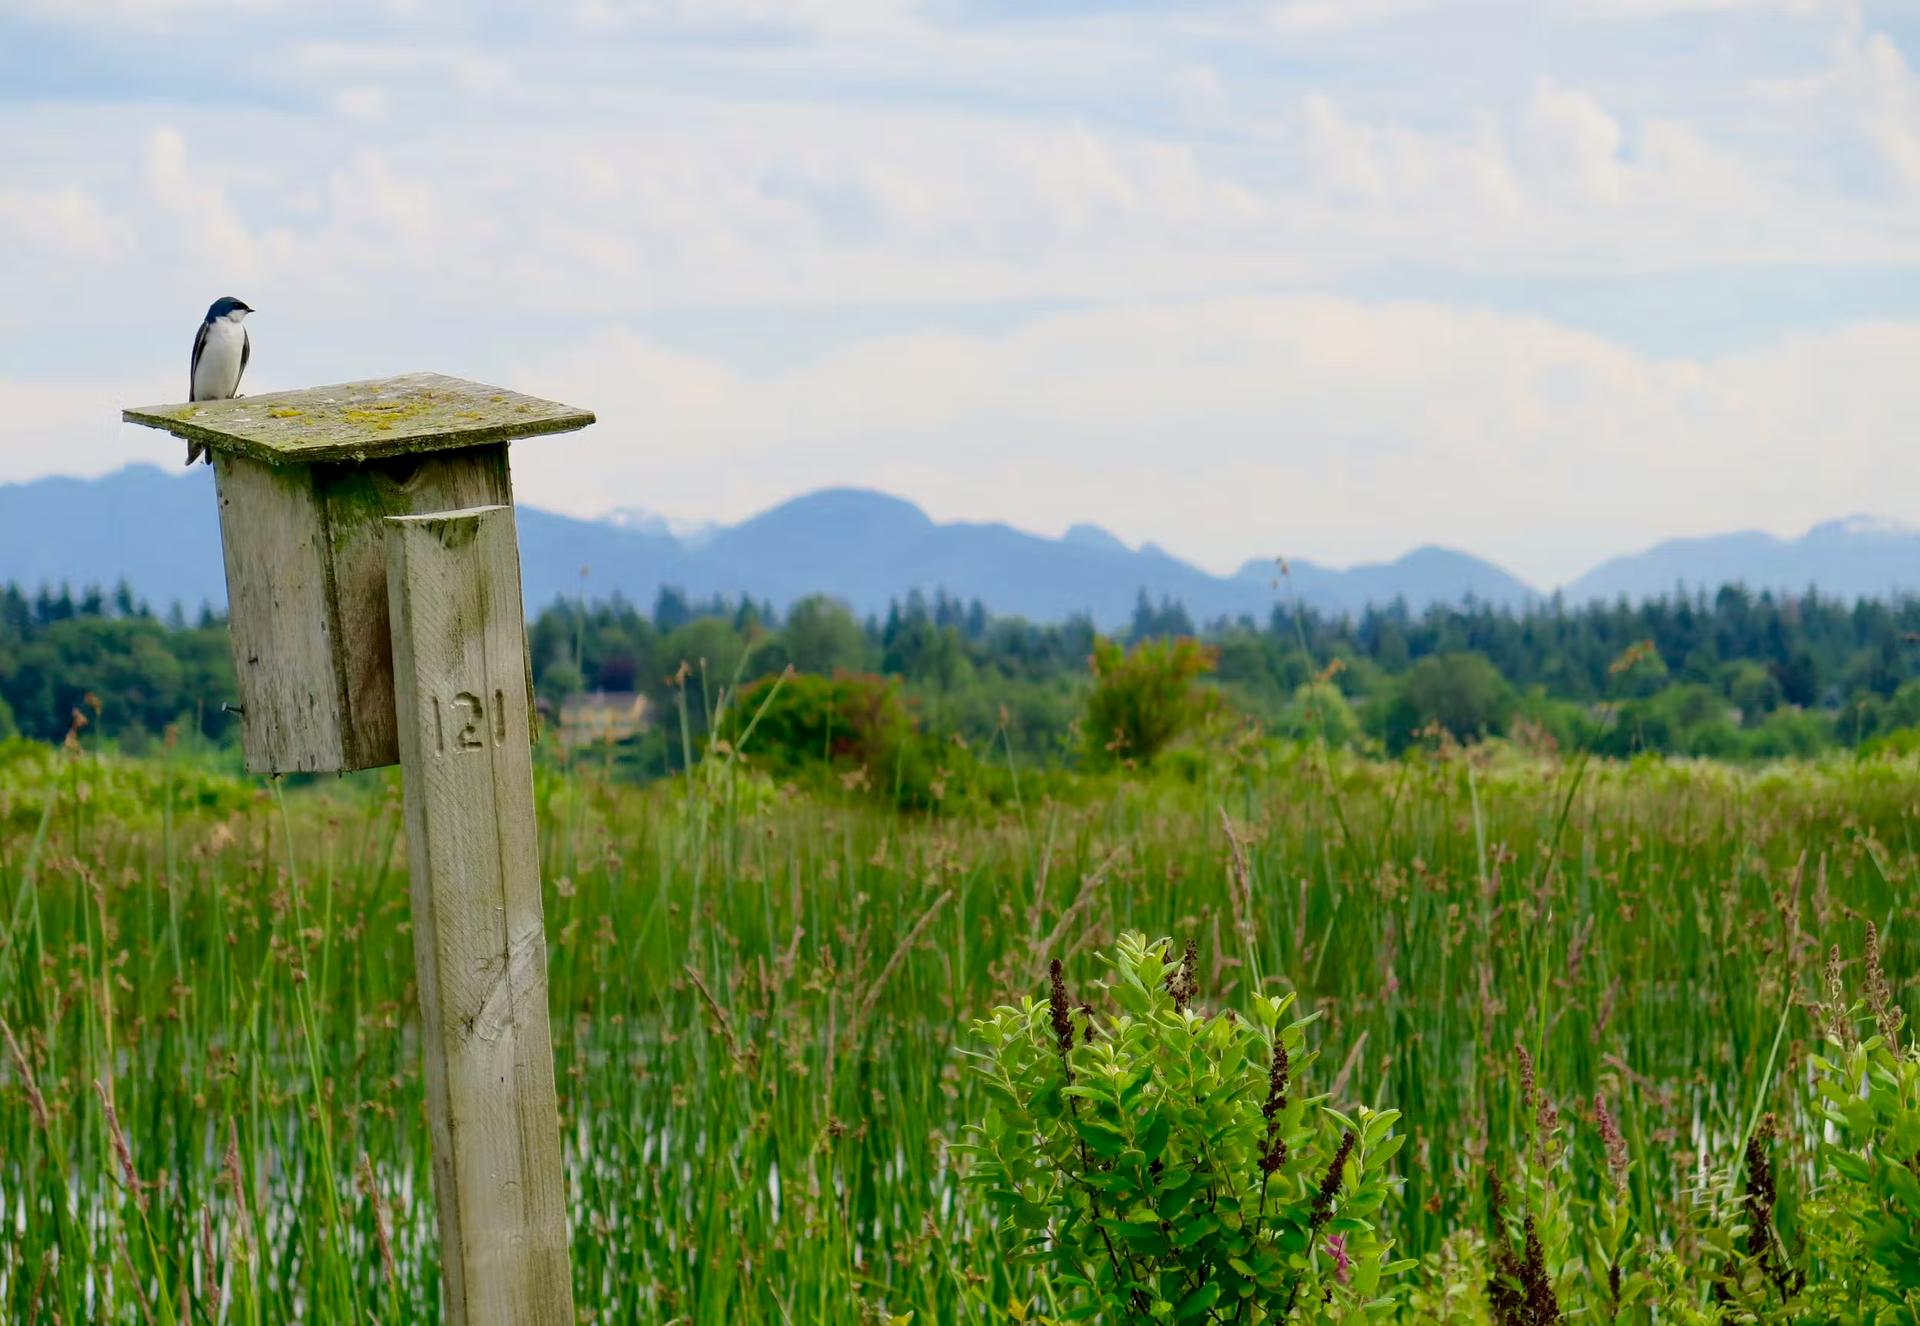 A small bird sits atop a bird house that is mounted on a piece of milled lumber; the rest of the scene is dominated by long grasses and marsh, immediately behind the bird house, while distant forests and mountains are in the background.